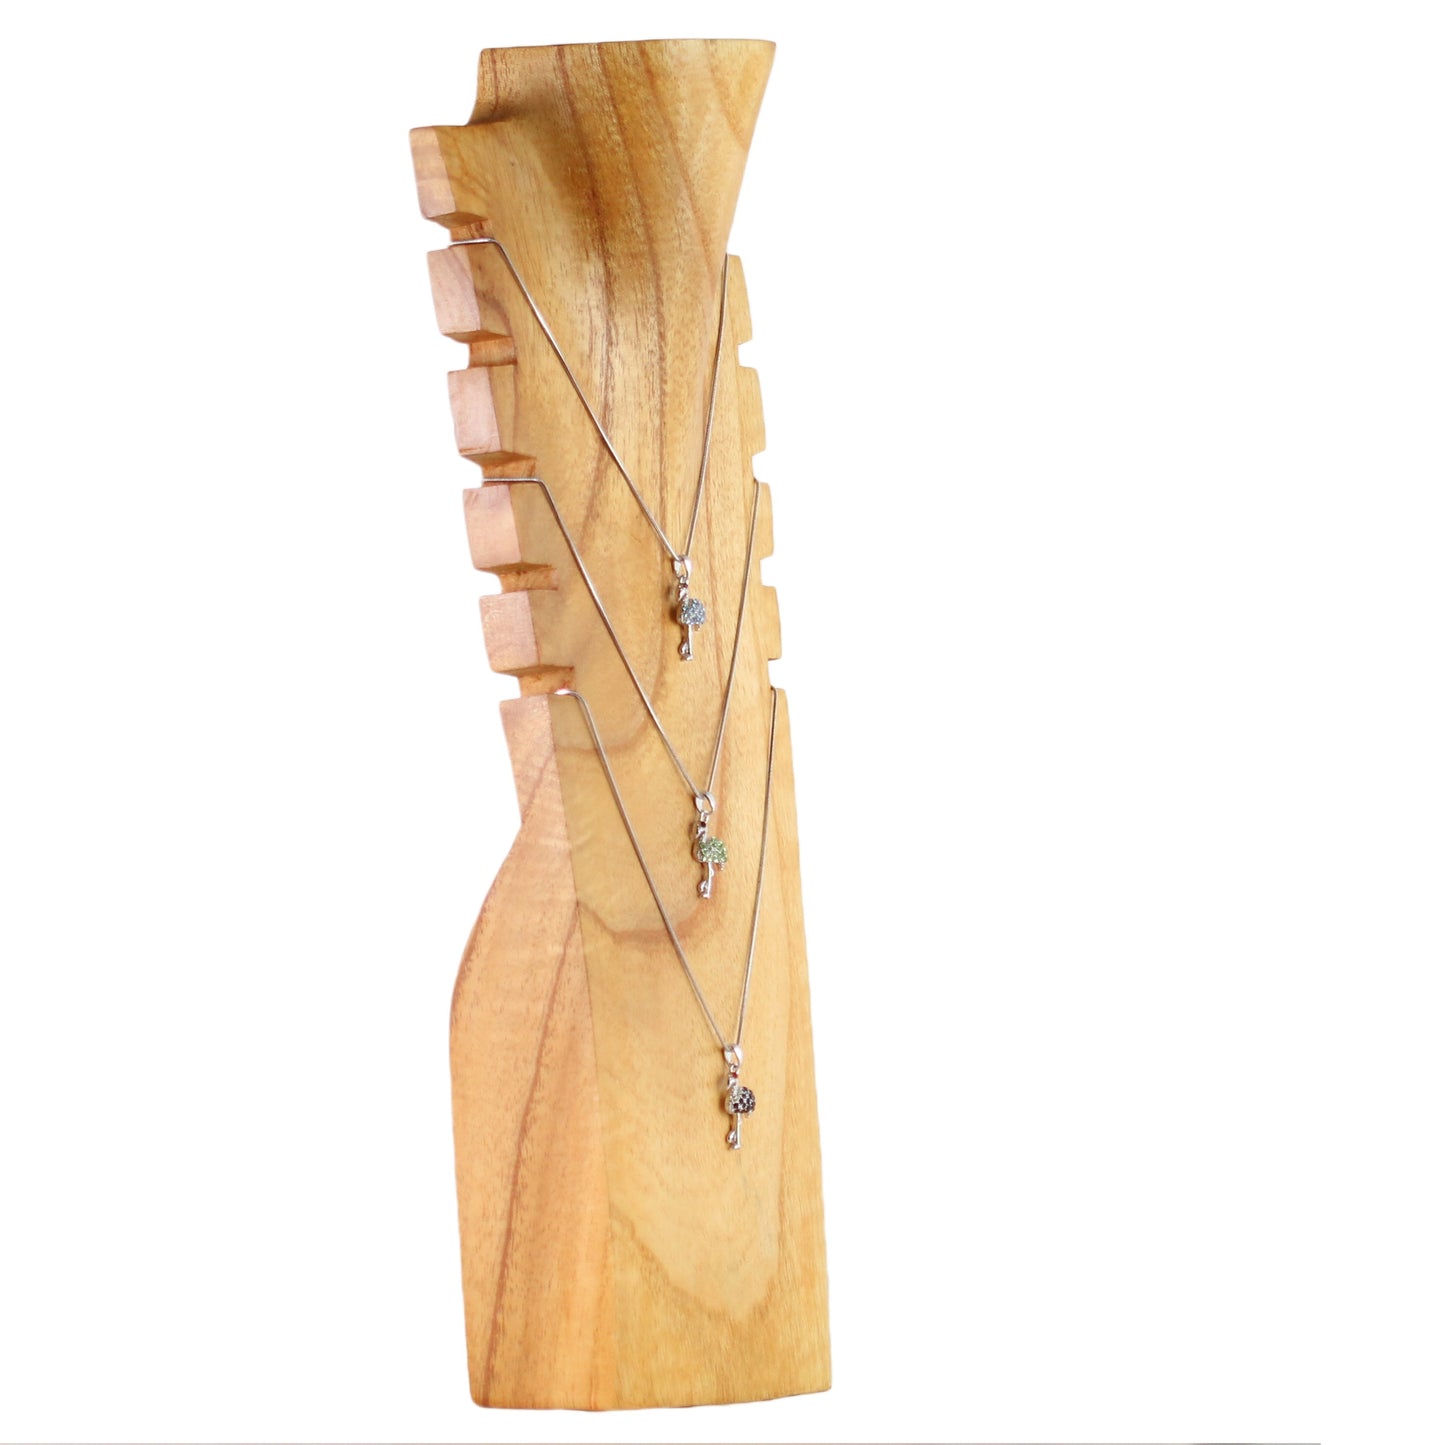 40 cm necklace stand jewelry stand chain display jewelry bust made of wood for several necklaces natural